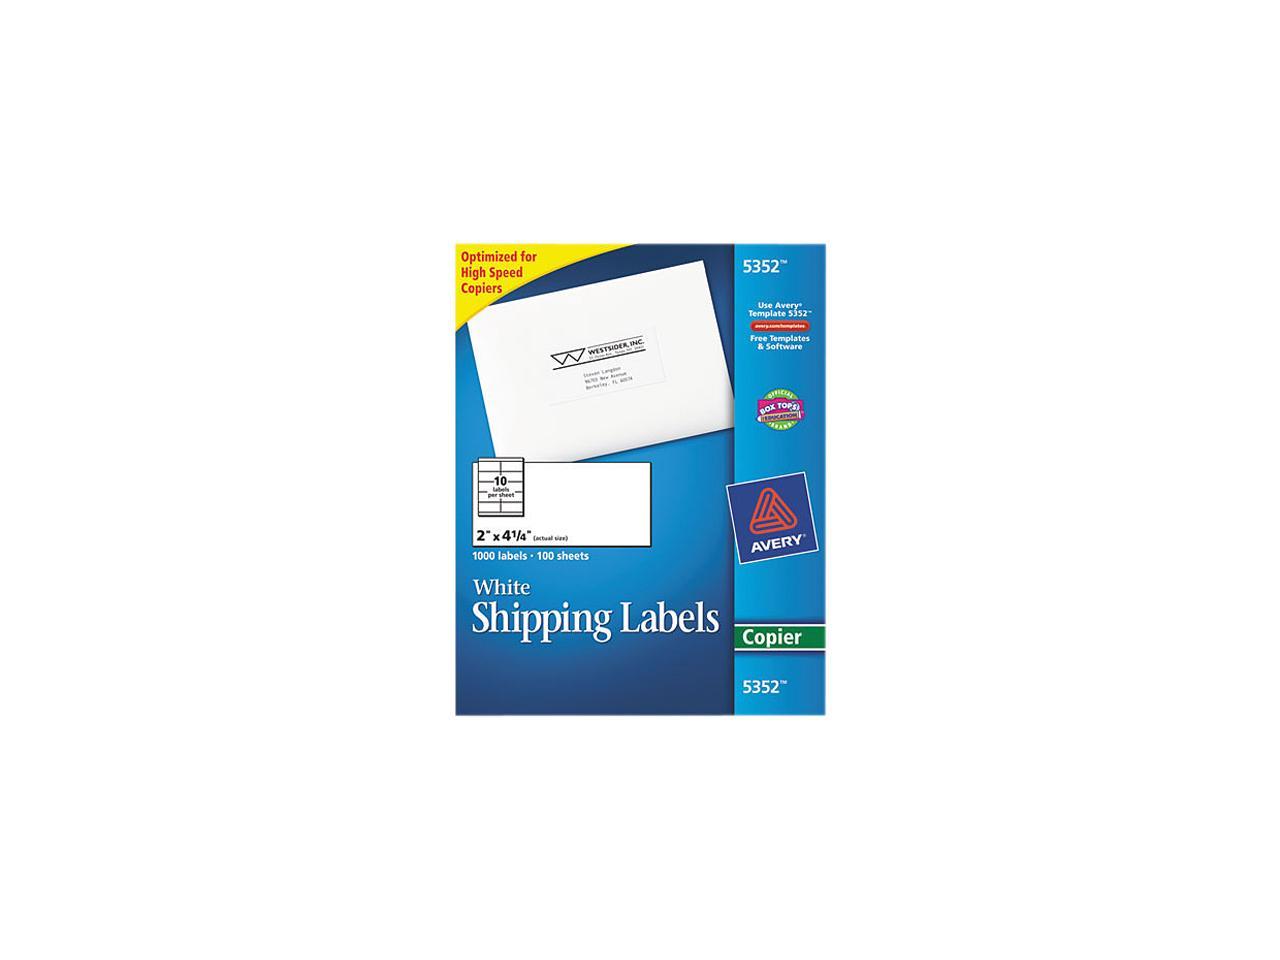 avery-5352-self-adhesive-shipping-labels-for-copiers-2-x-4-1-4-white